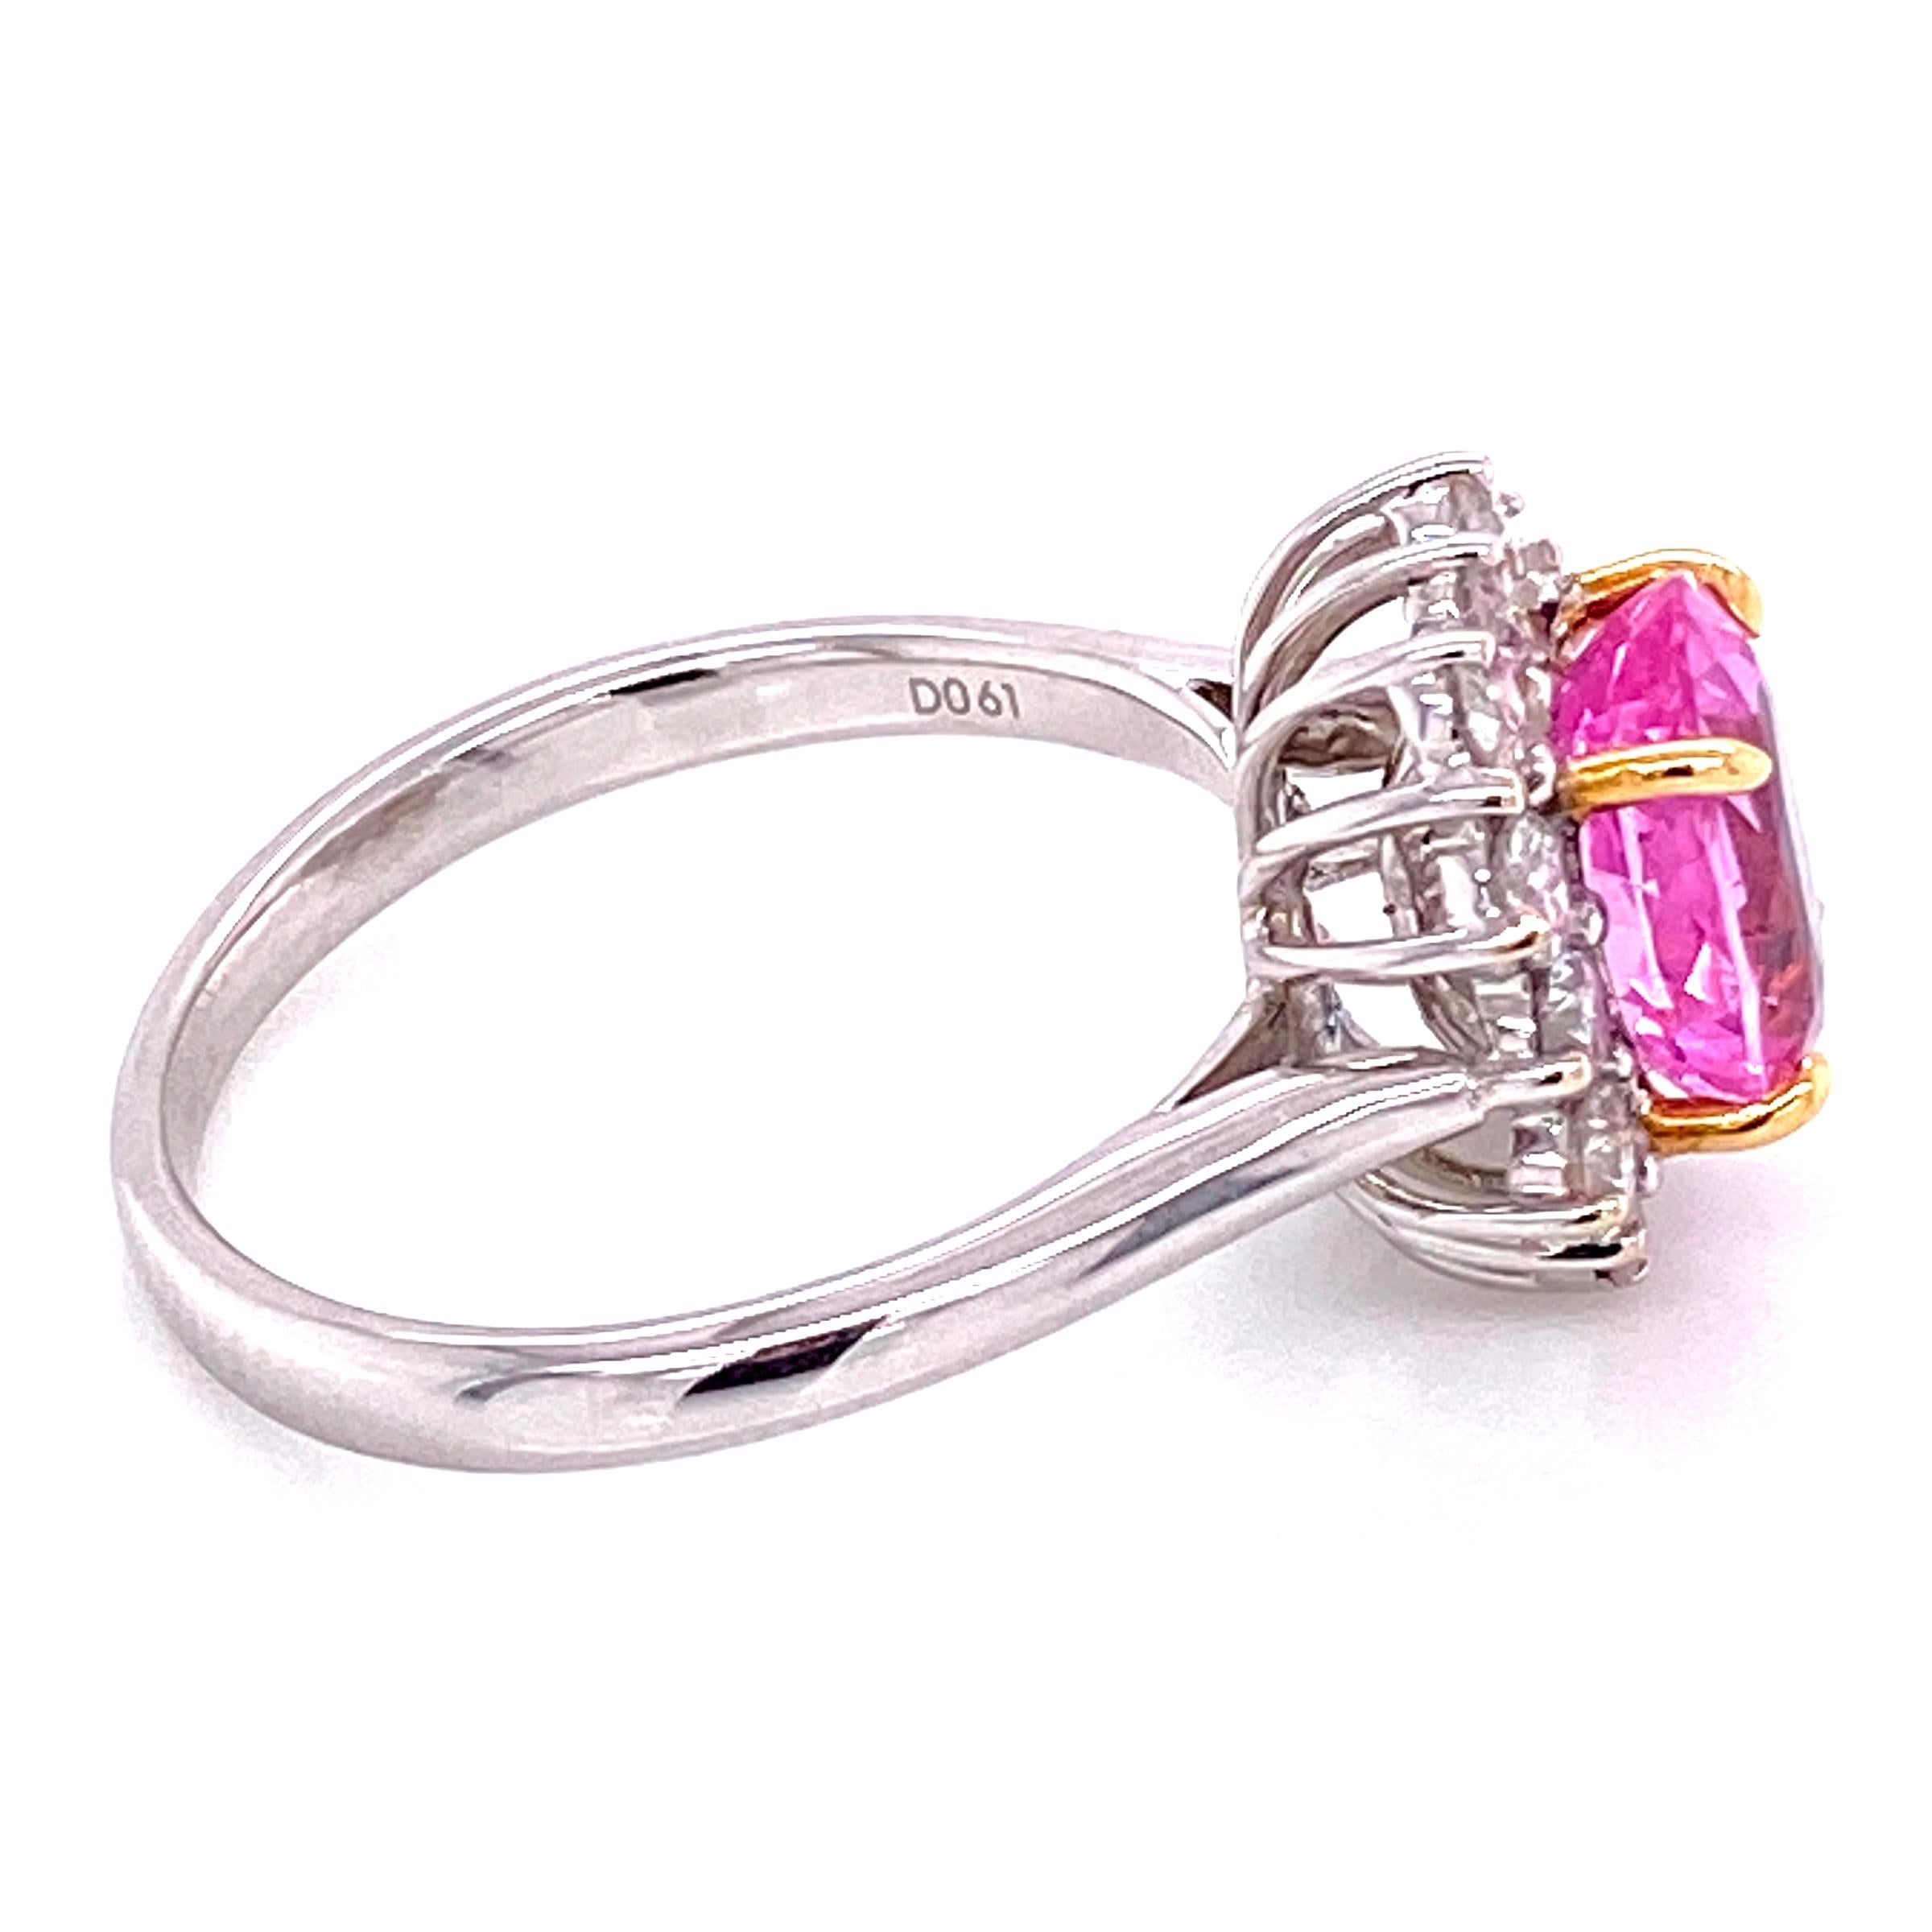 Vintage 2.32 Carat Pink Sapphire Diamond Gold Cocktail Ring Estate Fine Jewelry For Sale 1